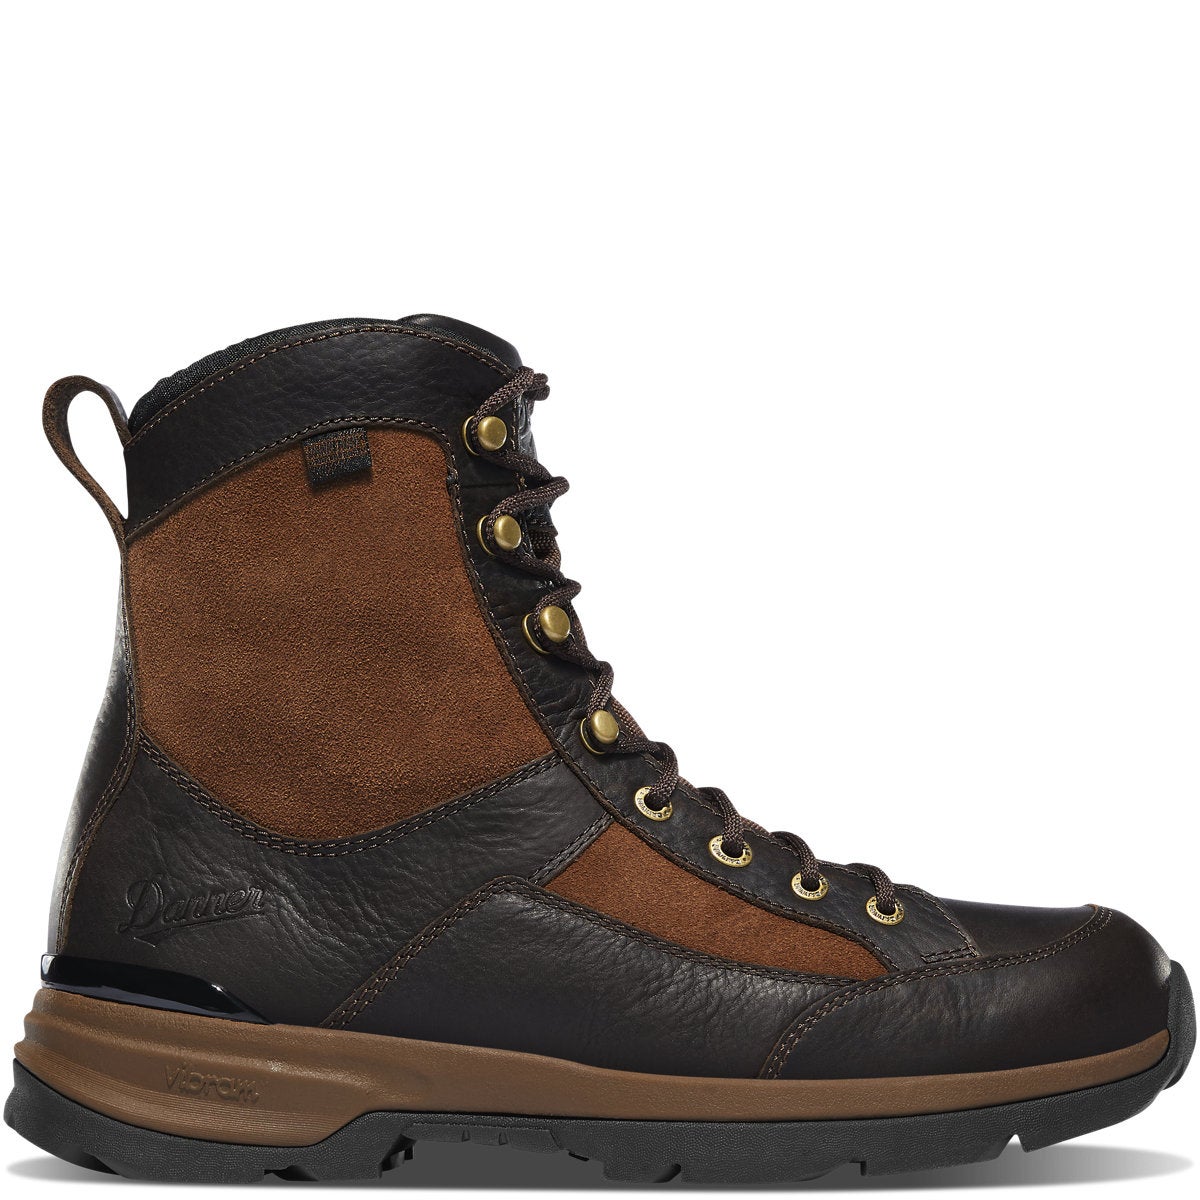 Danner recurve upland hunting boot. 